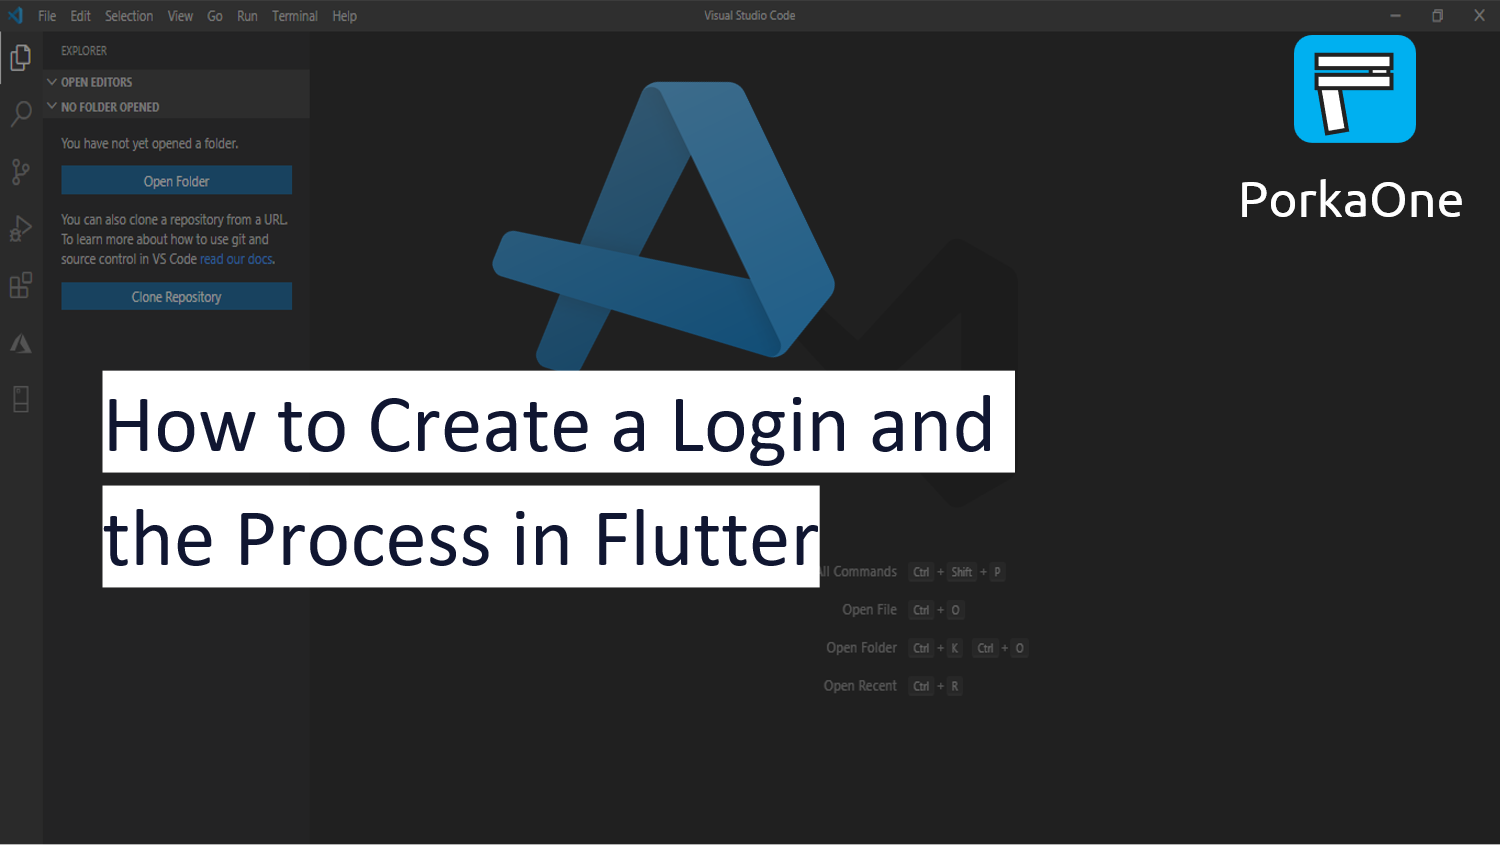 How to Create a Login and the Process in Flutter